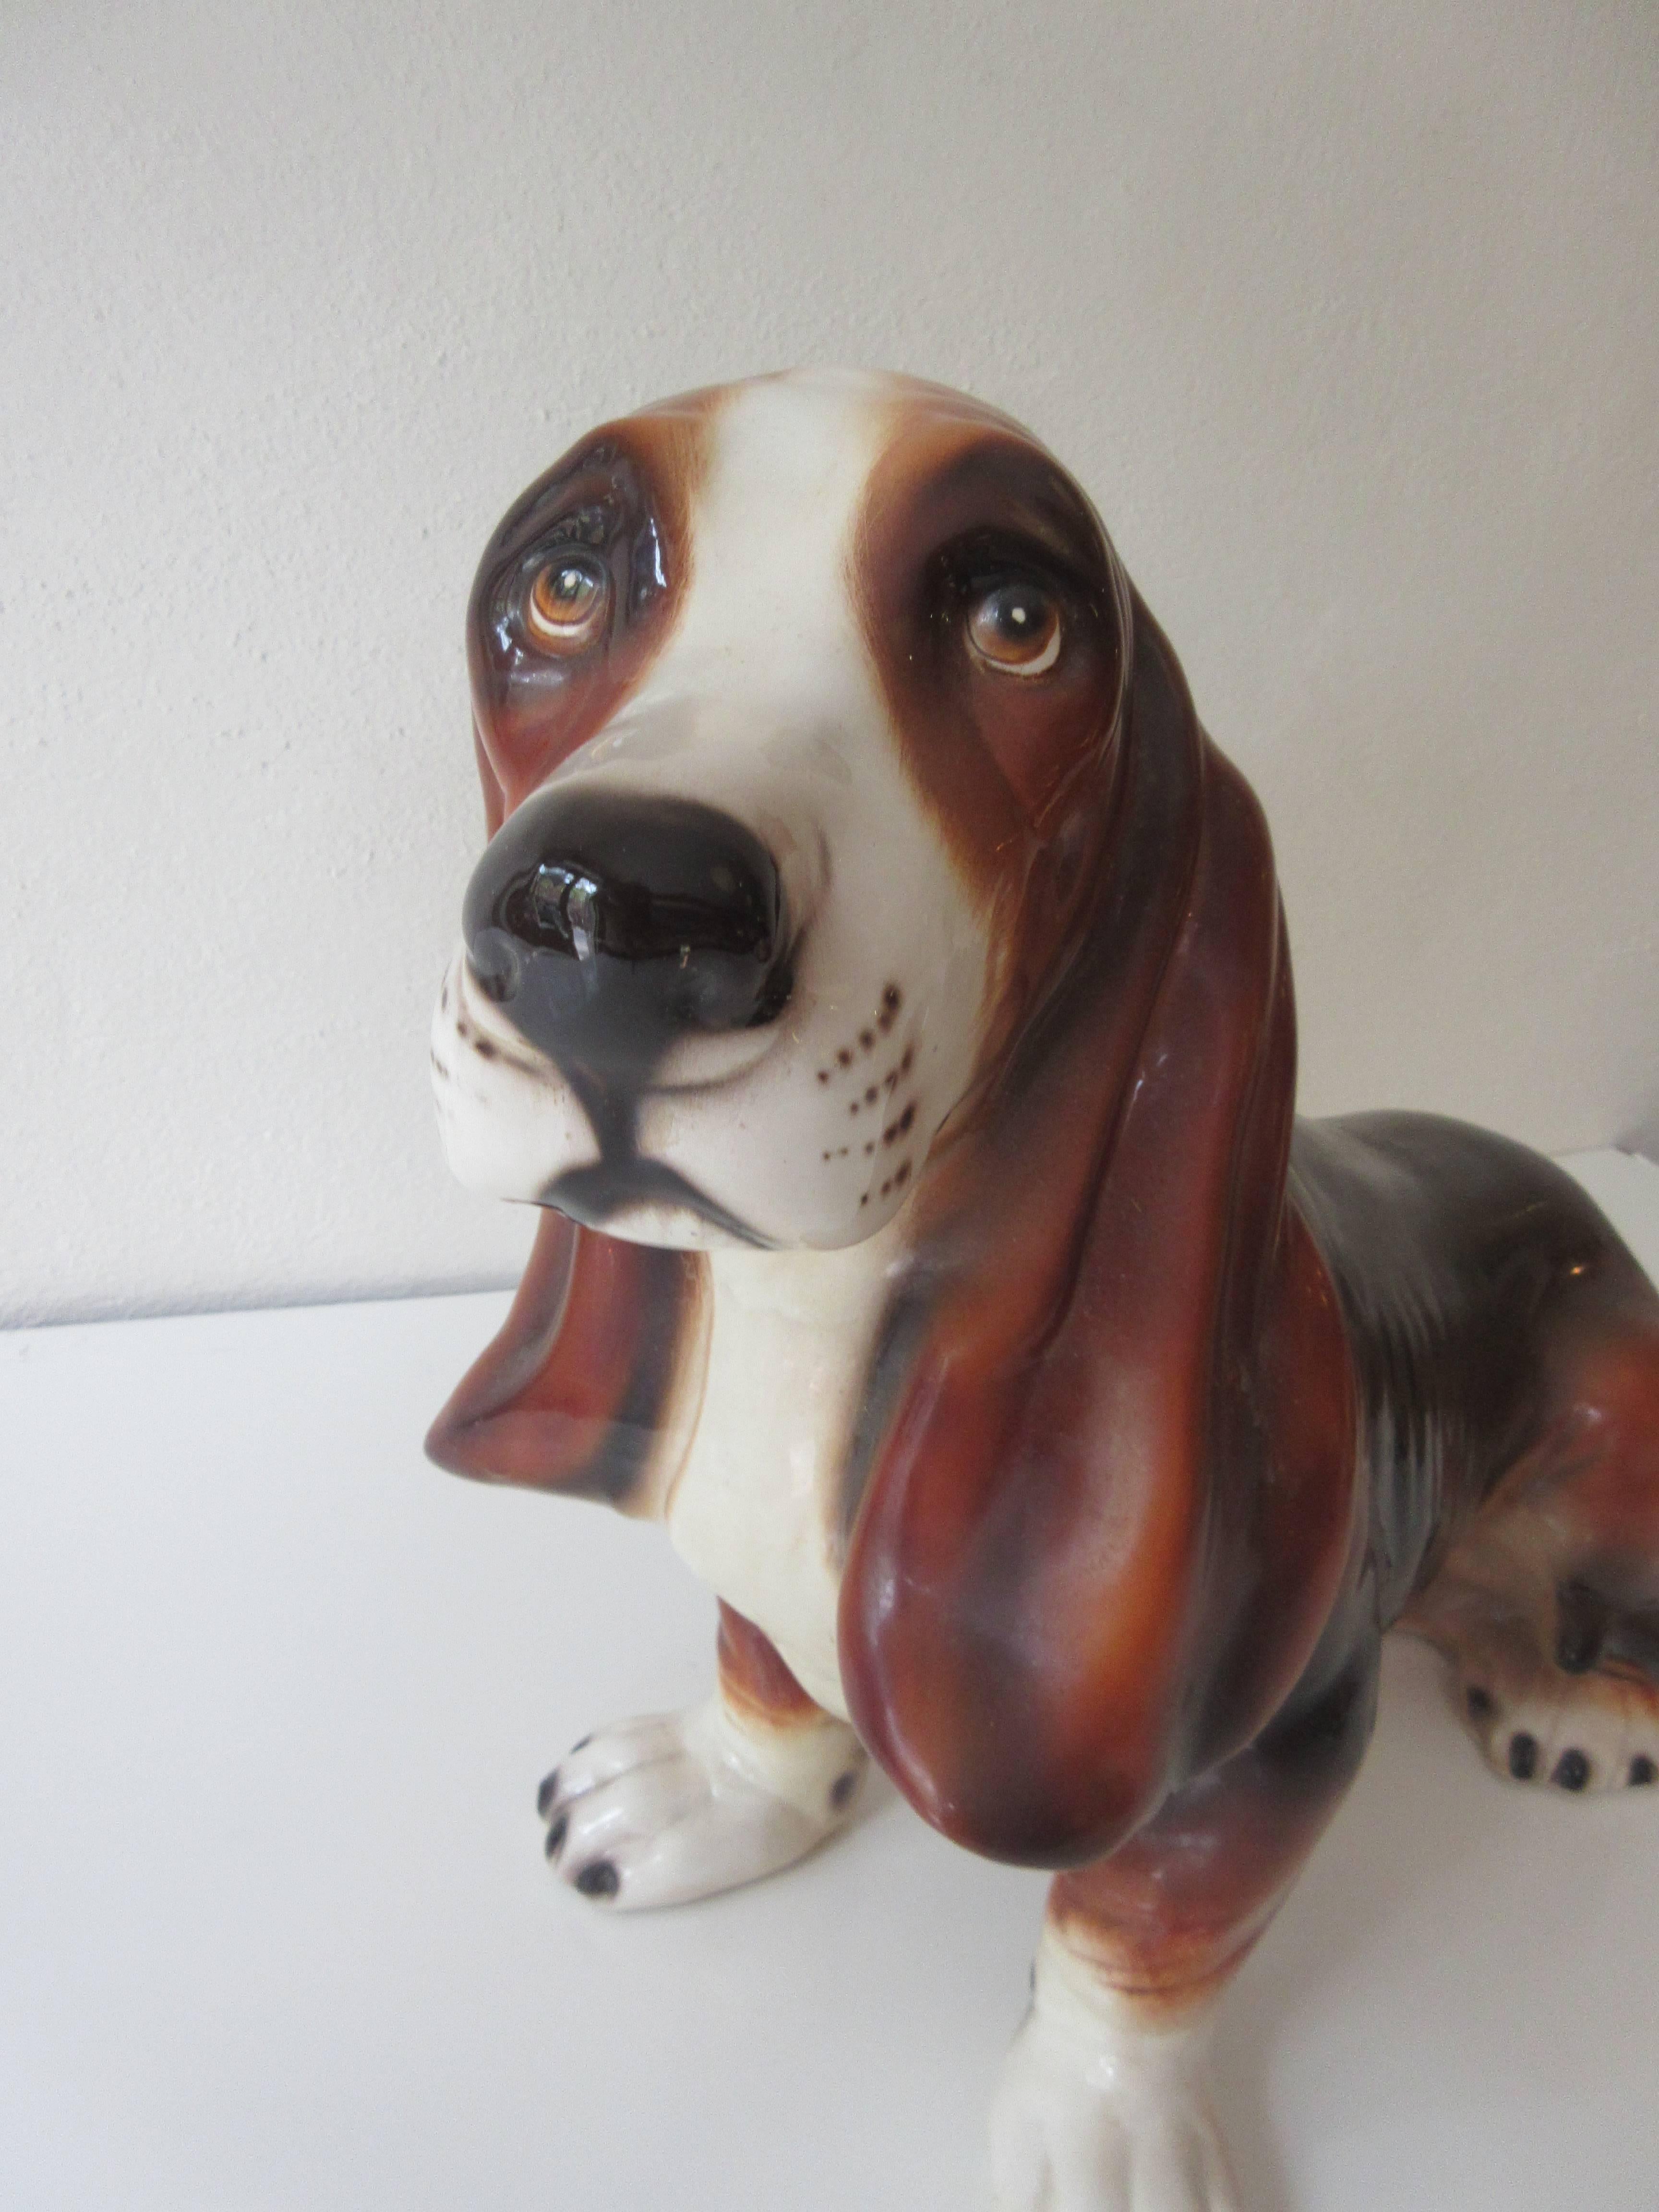 Ceramic Bassett Hound incised Montebello made in Italy with symbol. One chip on underside rear foot not visible when sitting down. Single hole drilled on stomach purpose unknown, this adorable beastie has Bette Bassett eyes and realistic coloring